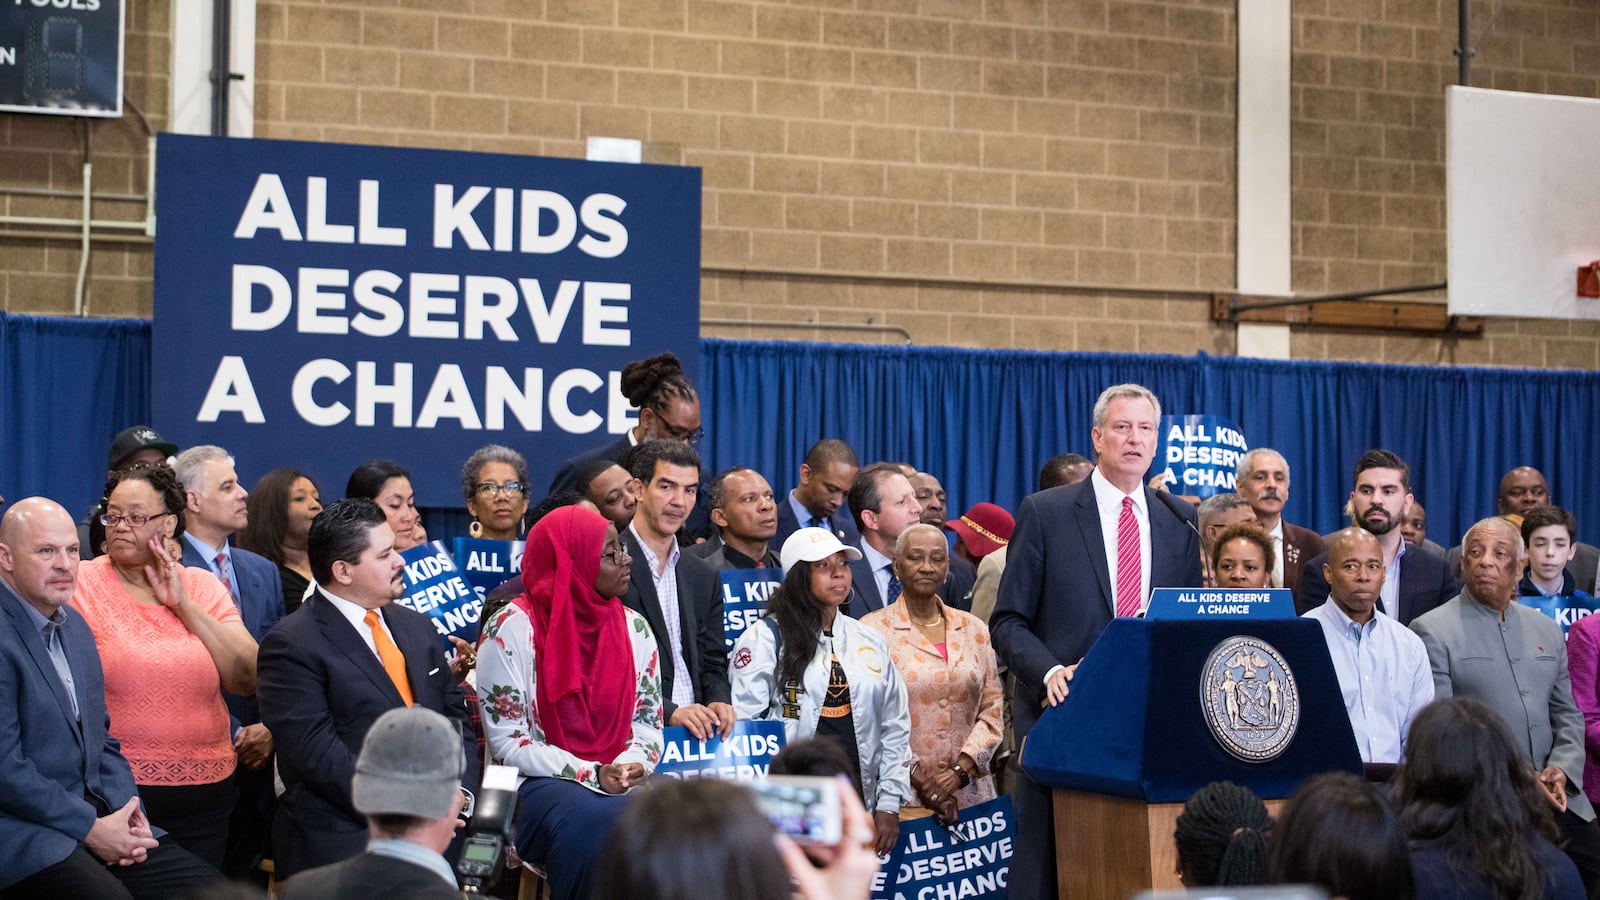 New York City Mayor Bill de Blasio announced this summer his proposal to overhaul admissions at specialized high schools.